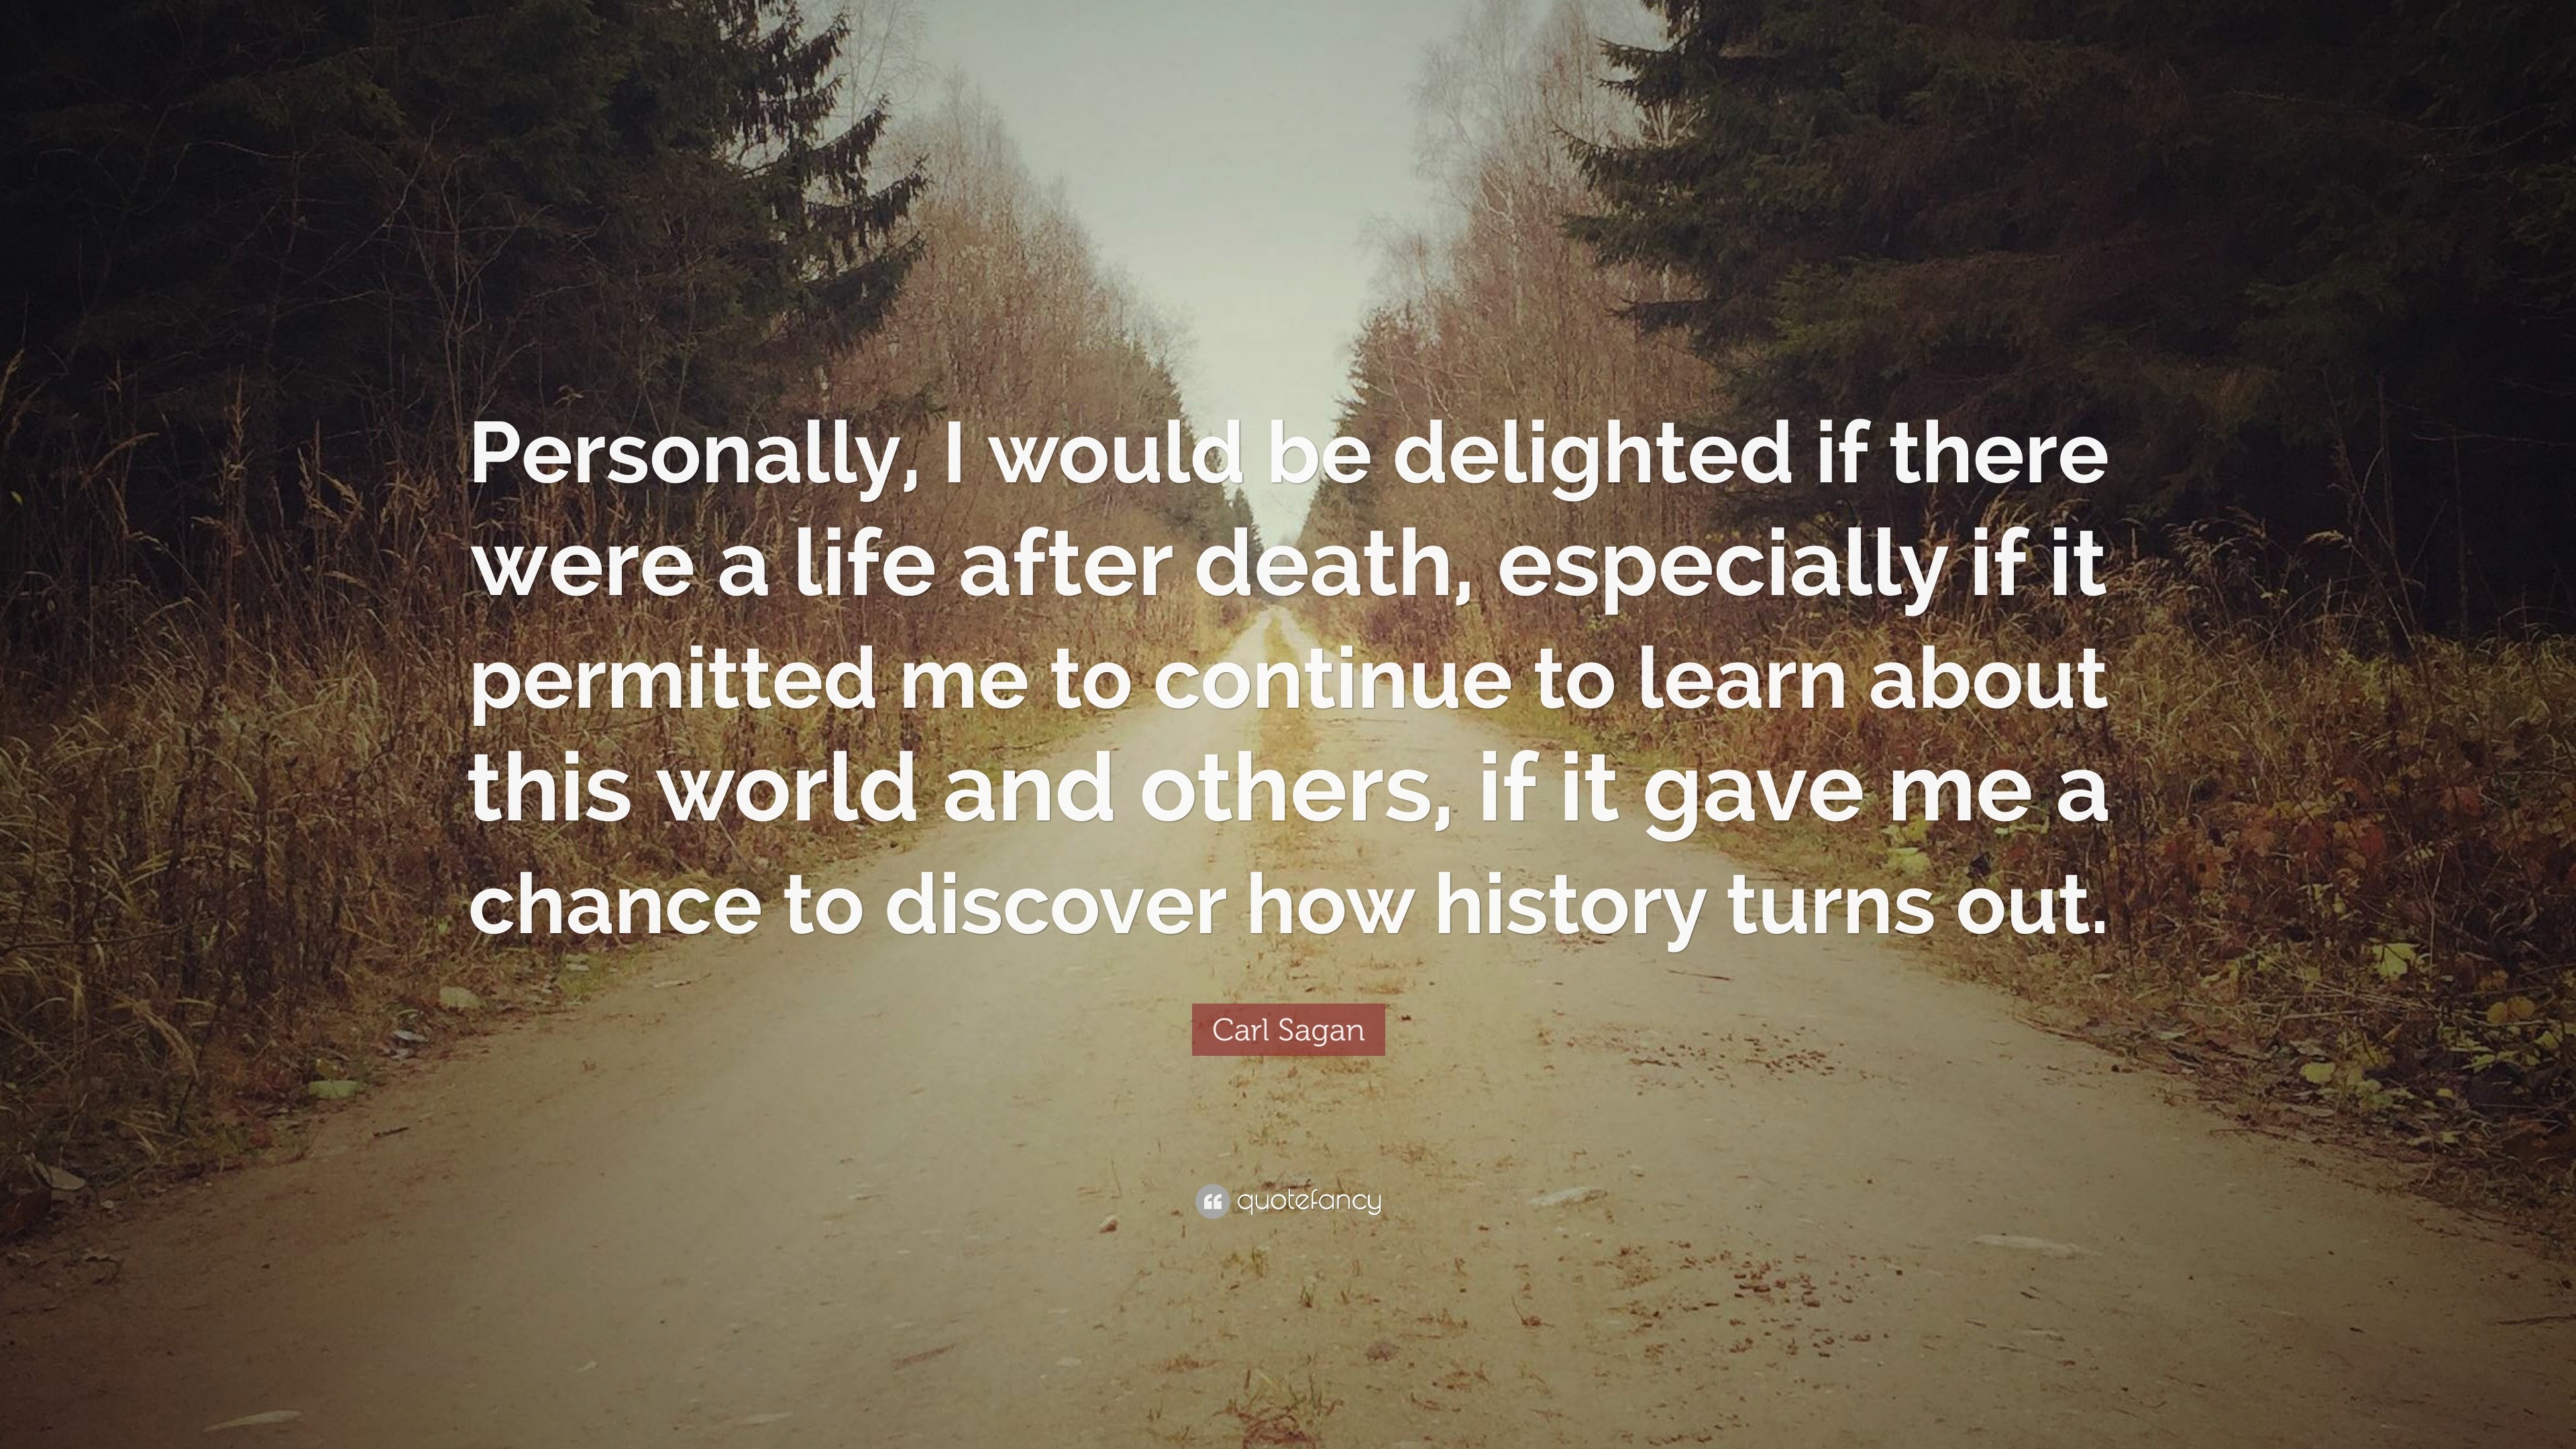 Carl Sagan Quote: “Personally, I would be delighted if there were a ...